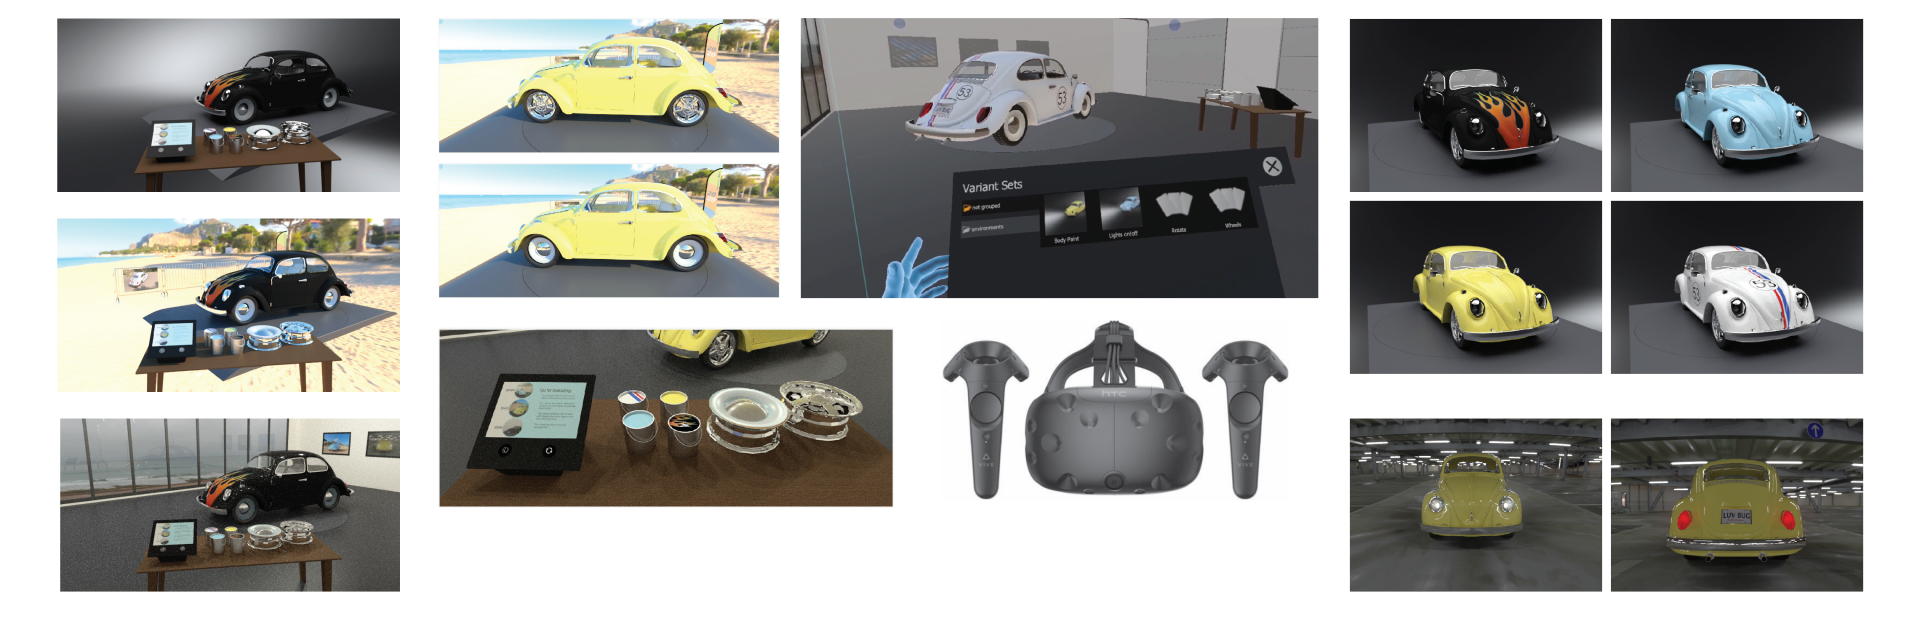 A 3D model of a volkswagon beetle, with different paint schemes on each